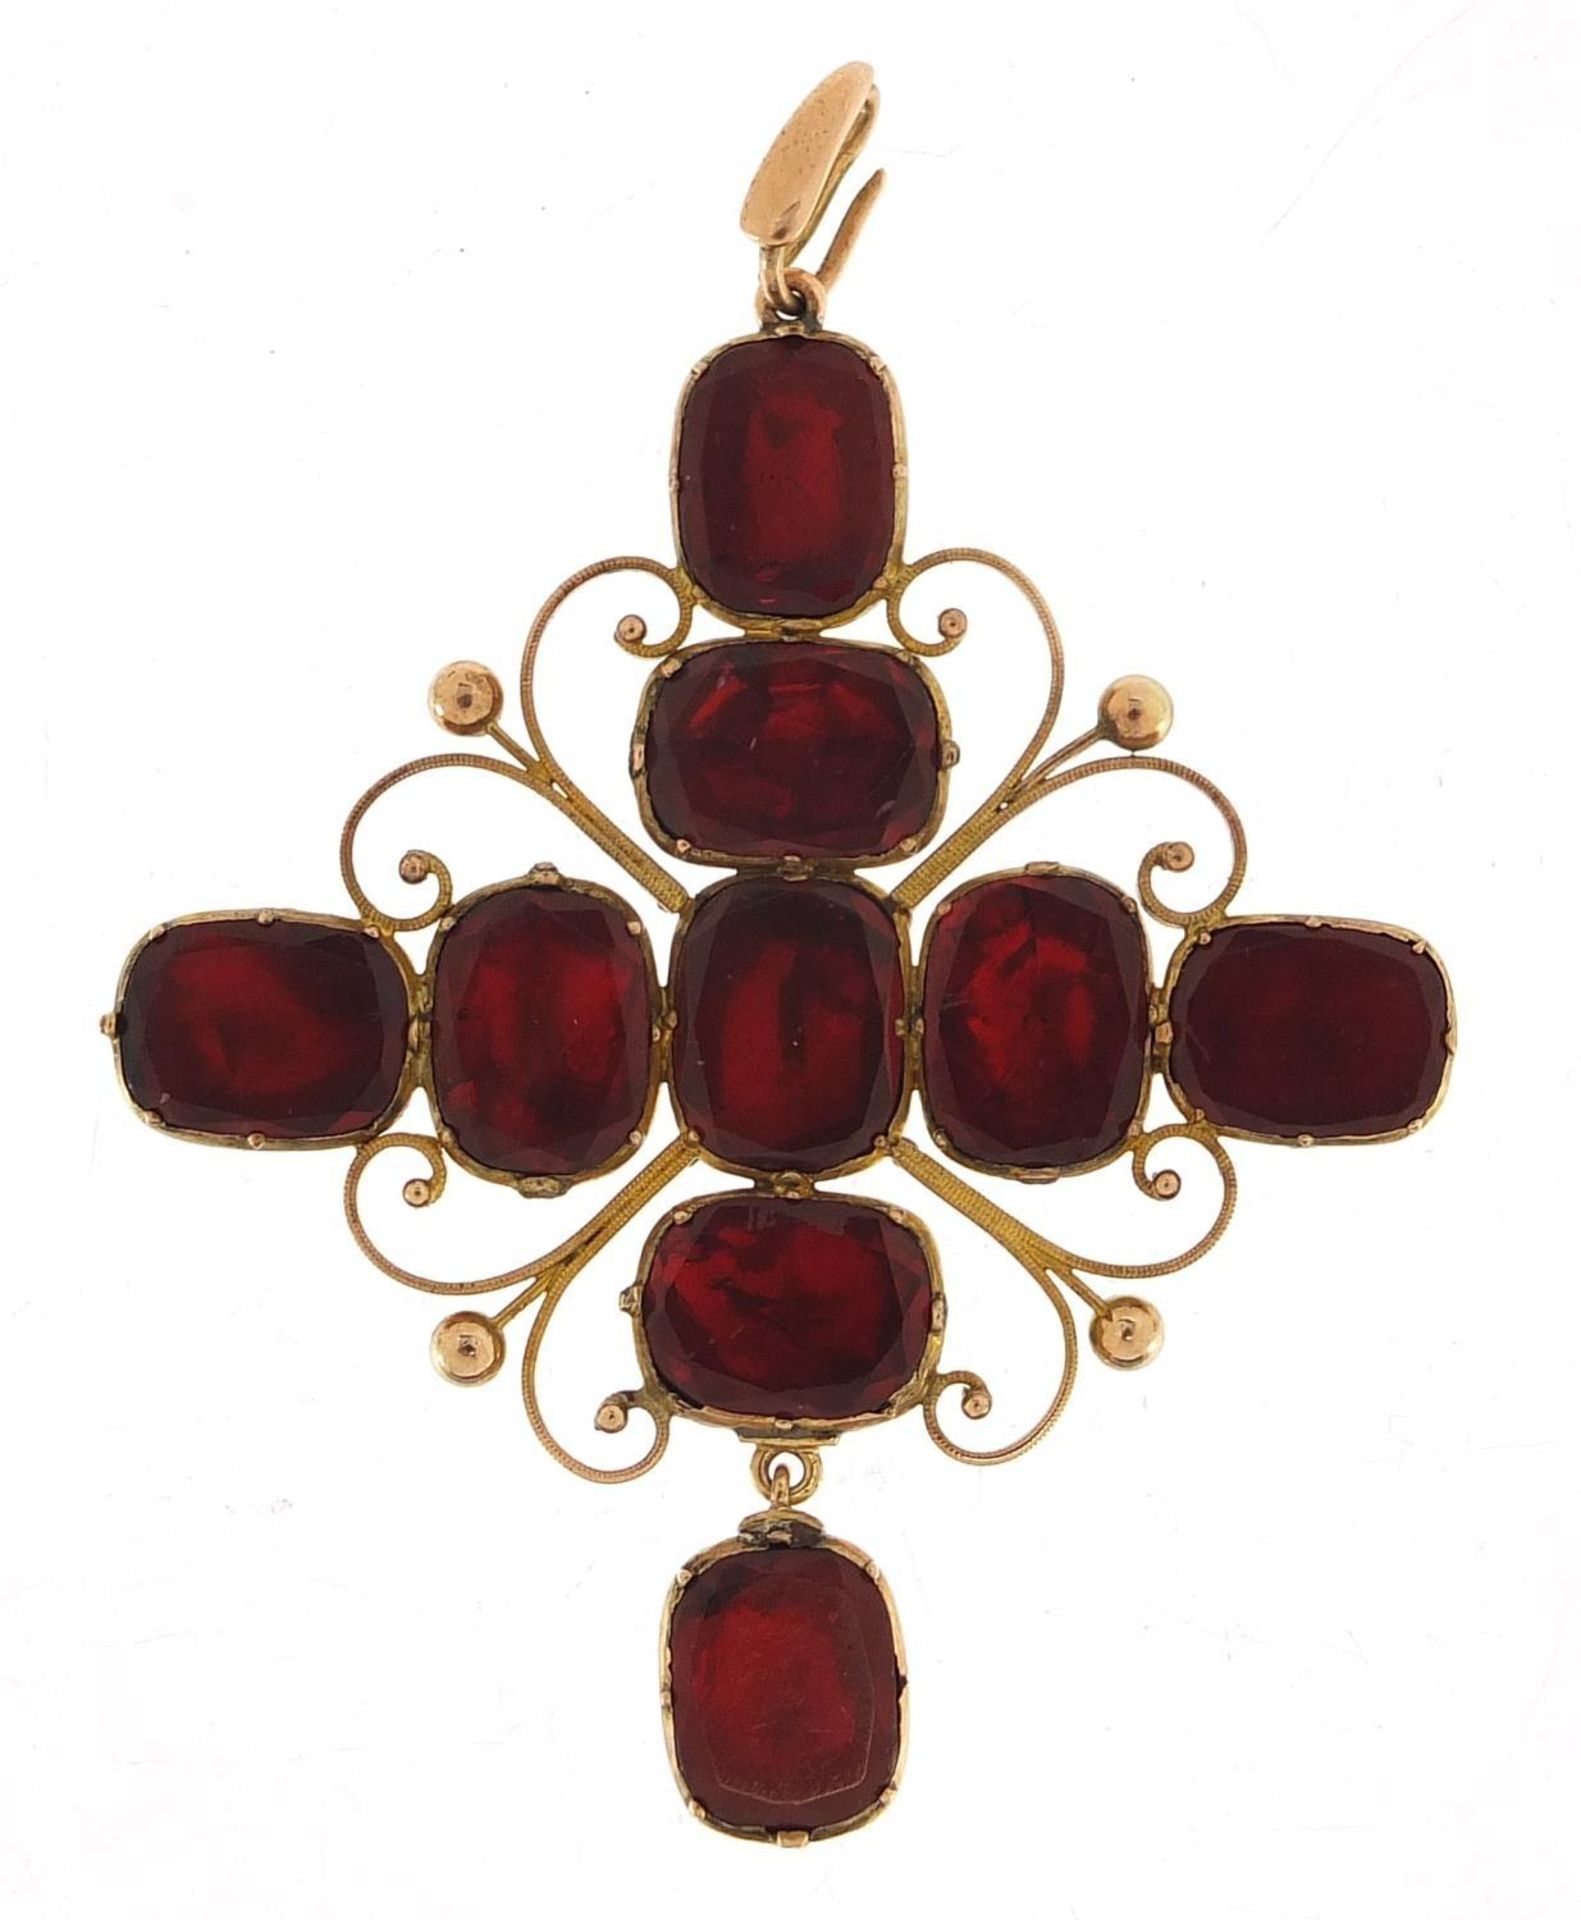 Large antique gold coloured metal red stone pendant, possibly garnet, 7cm high, 11.5g :